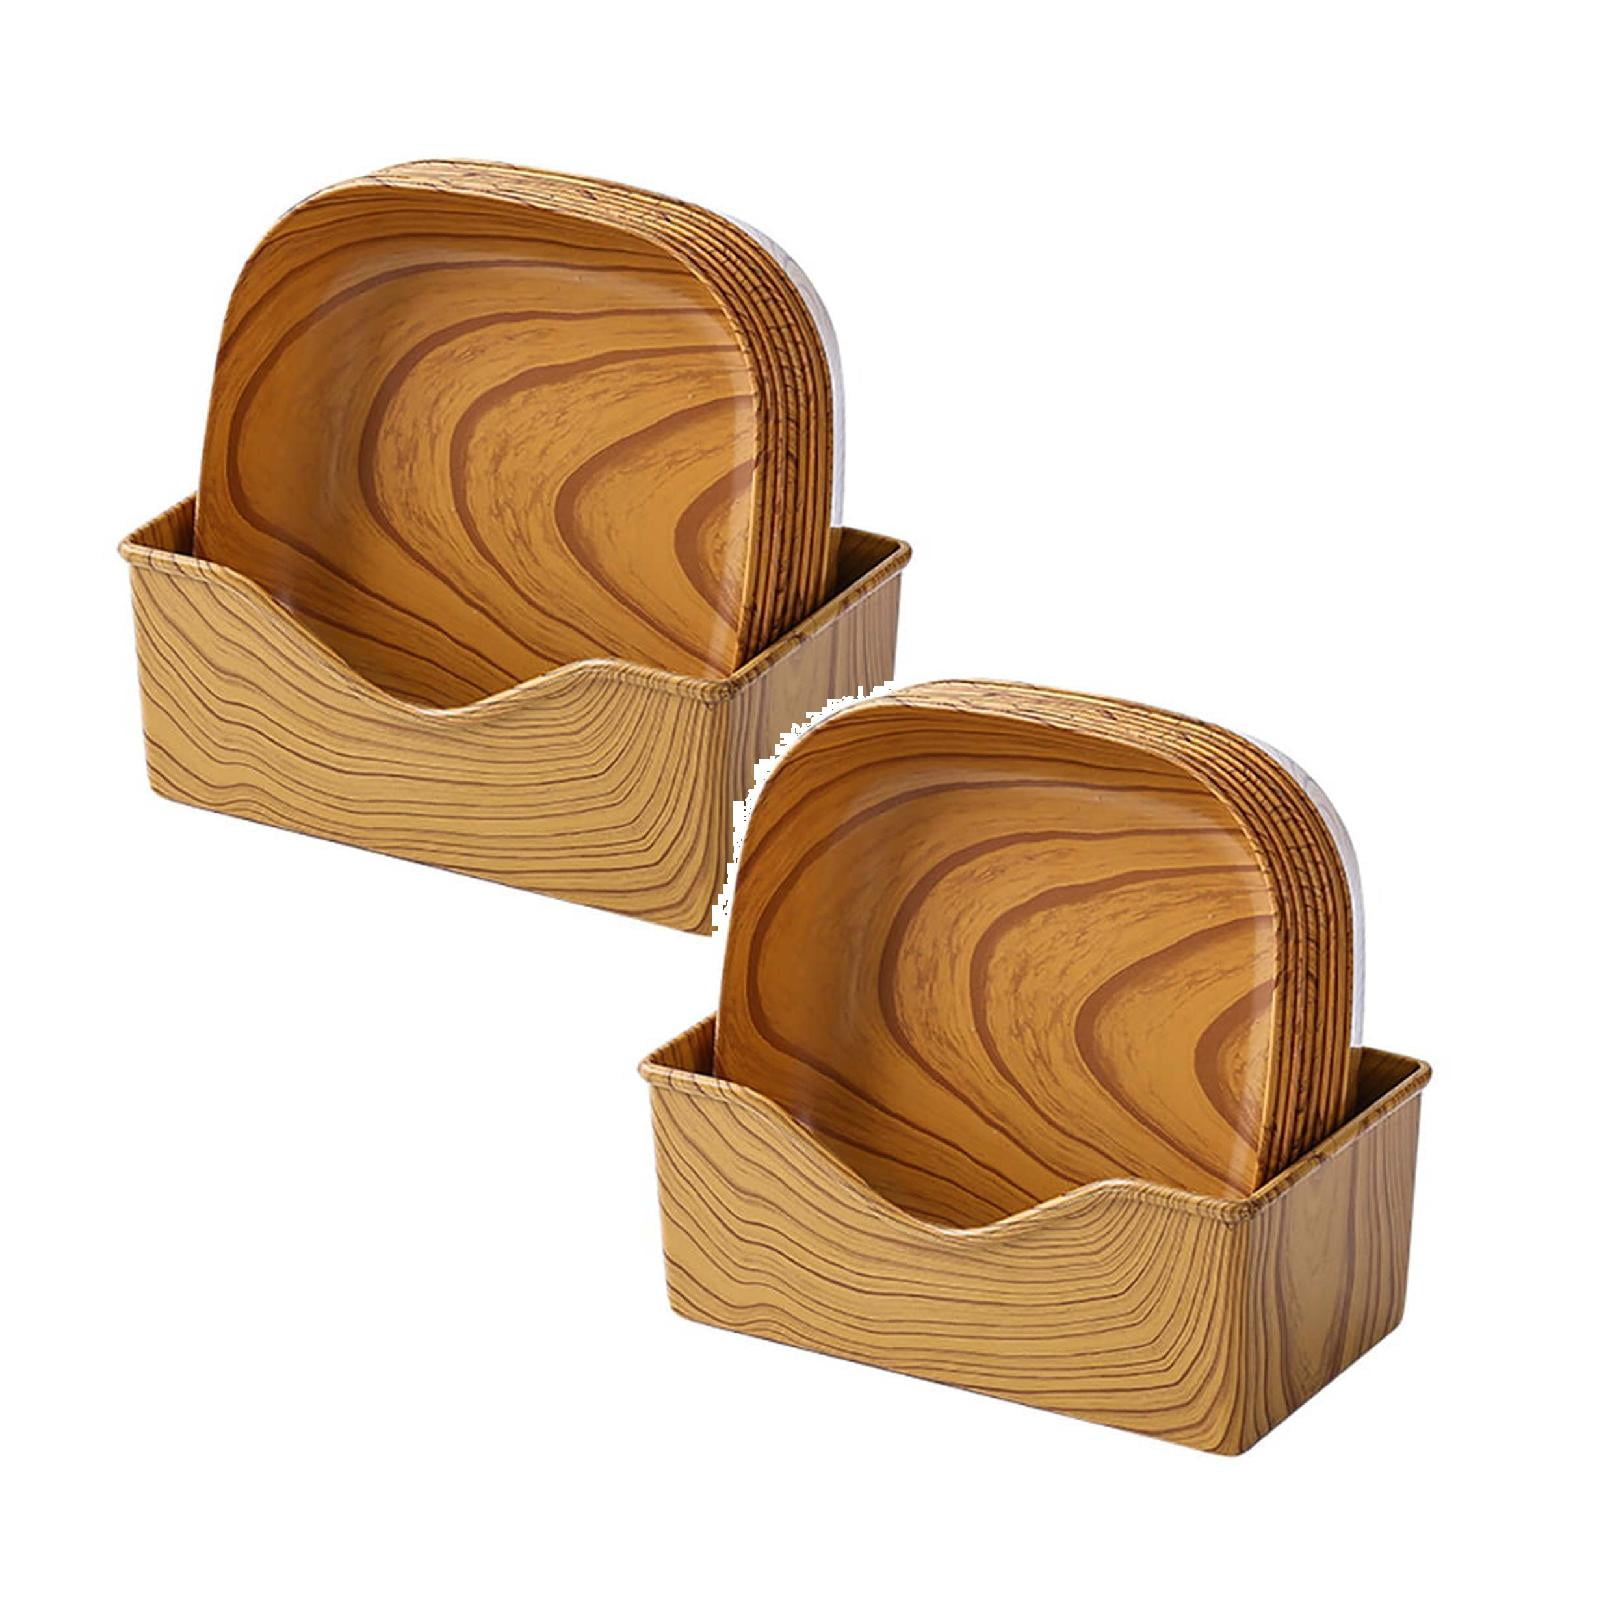 Princess House Cookware Oven Square Dinner Plate Tray Set with Storage Holder Set of 8 Wood Grain Square Dish 14cm Square Plates Dinnerware for